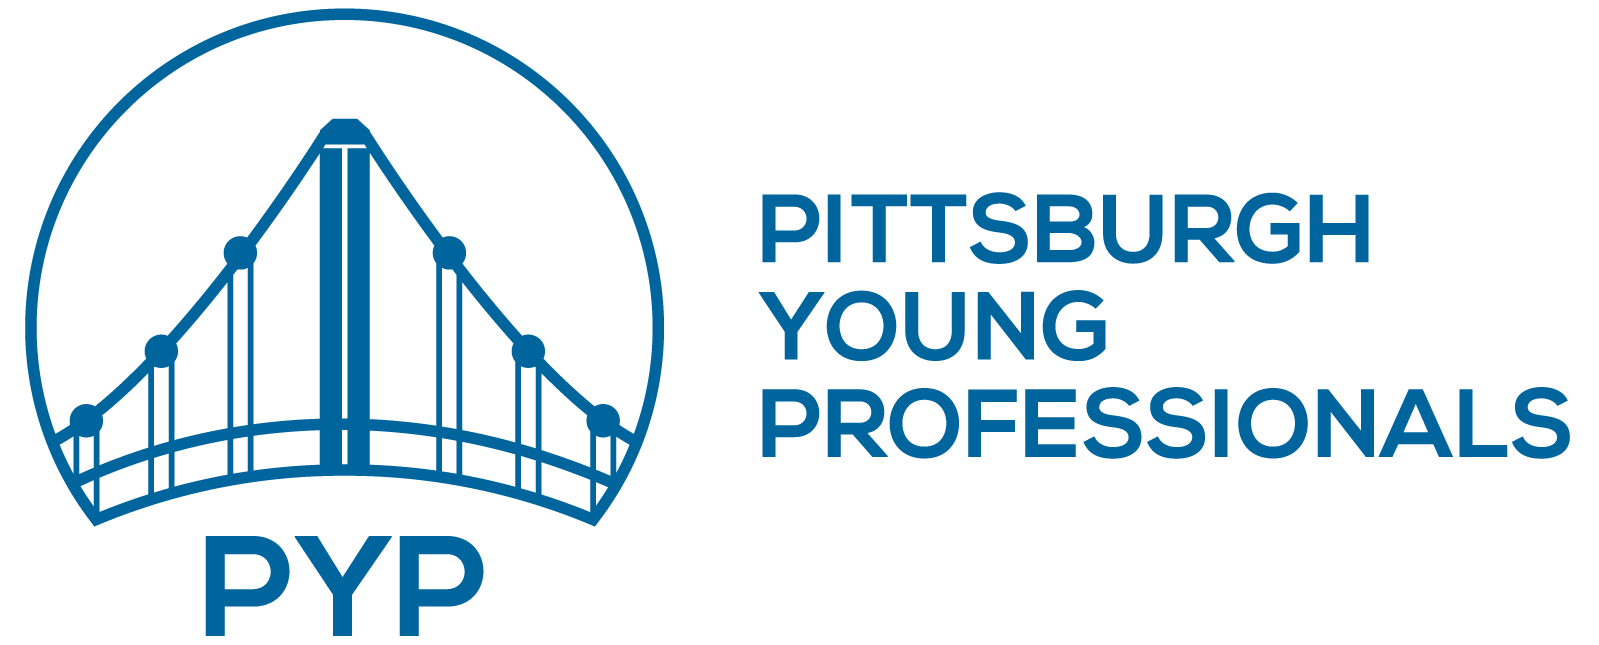 Pinnacle Announces Official Staffing and Recruiting Partnership with Pittsburgh Young Professionals